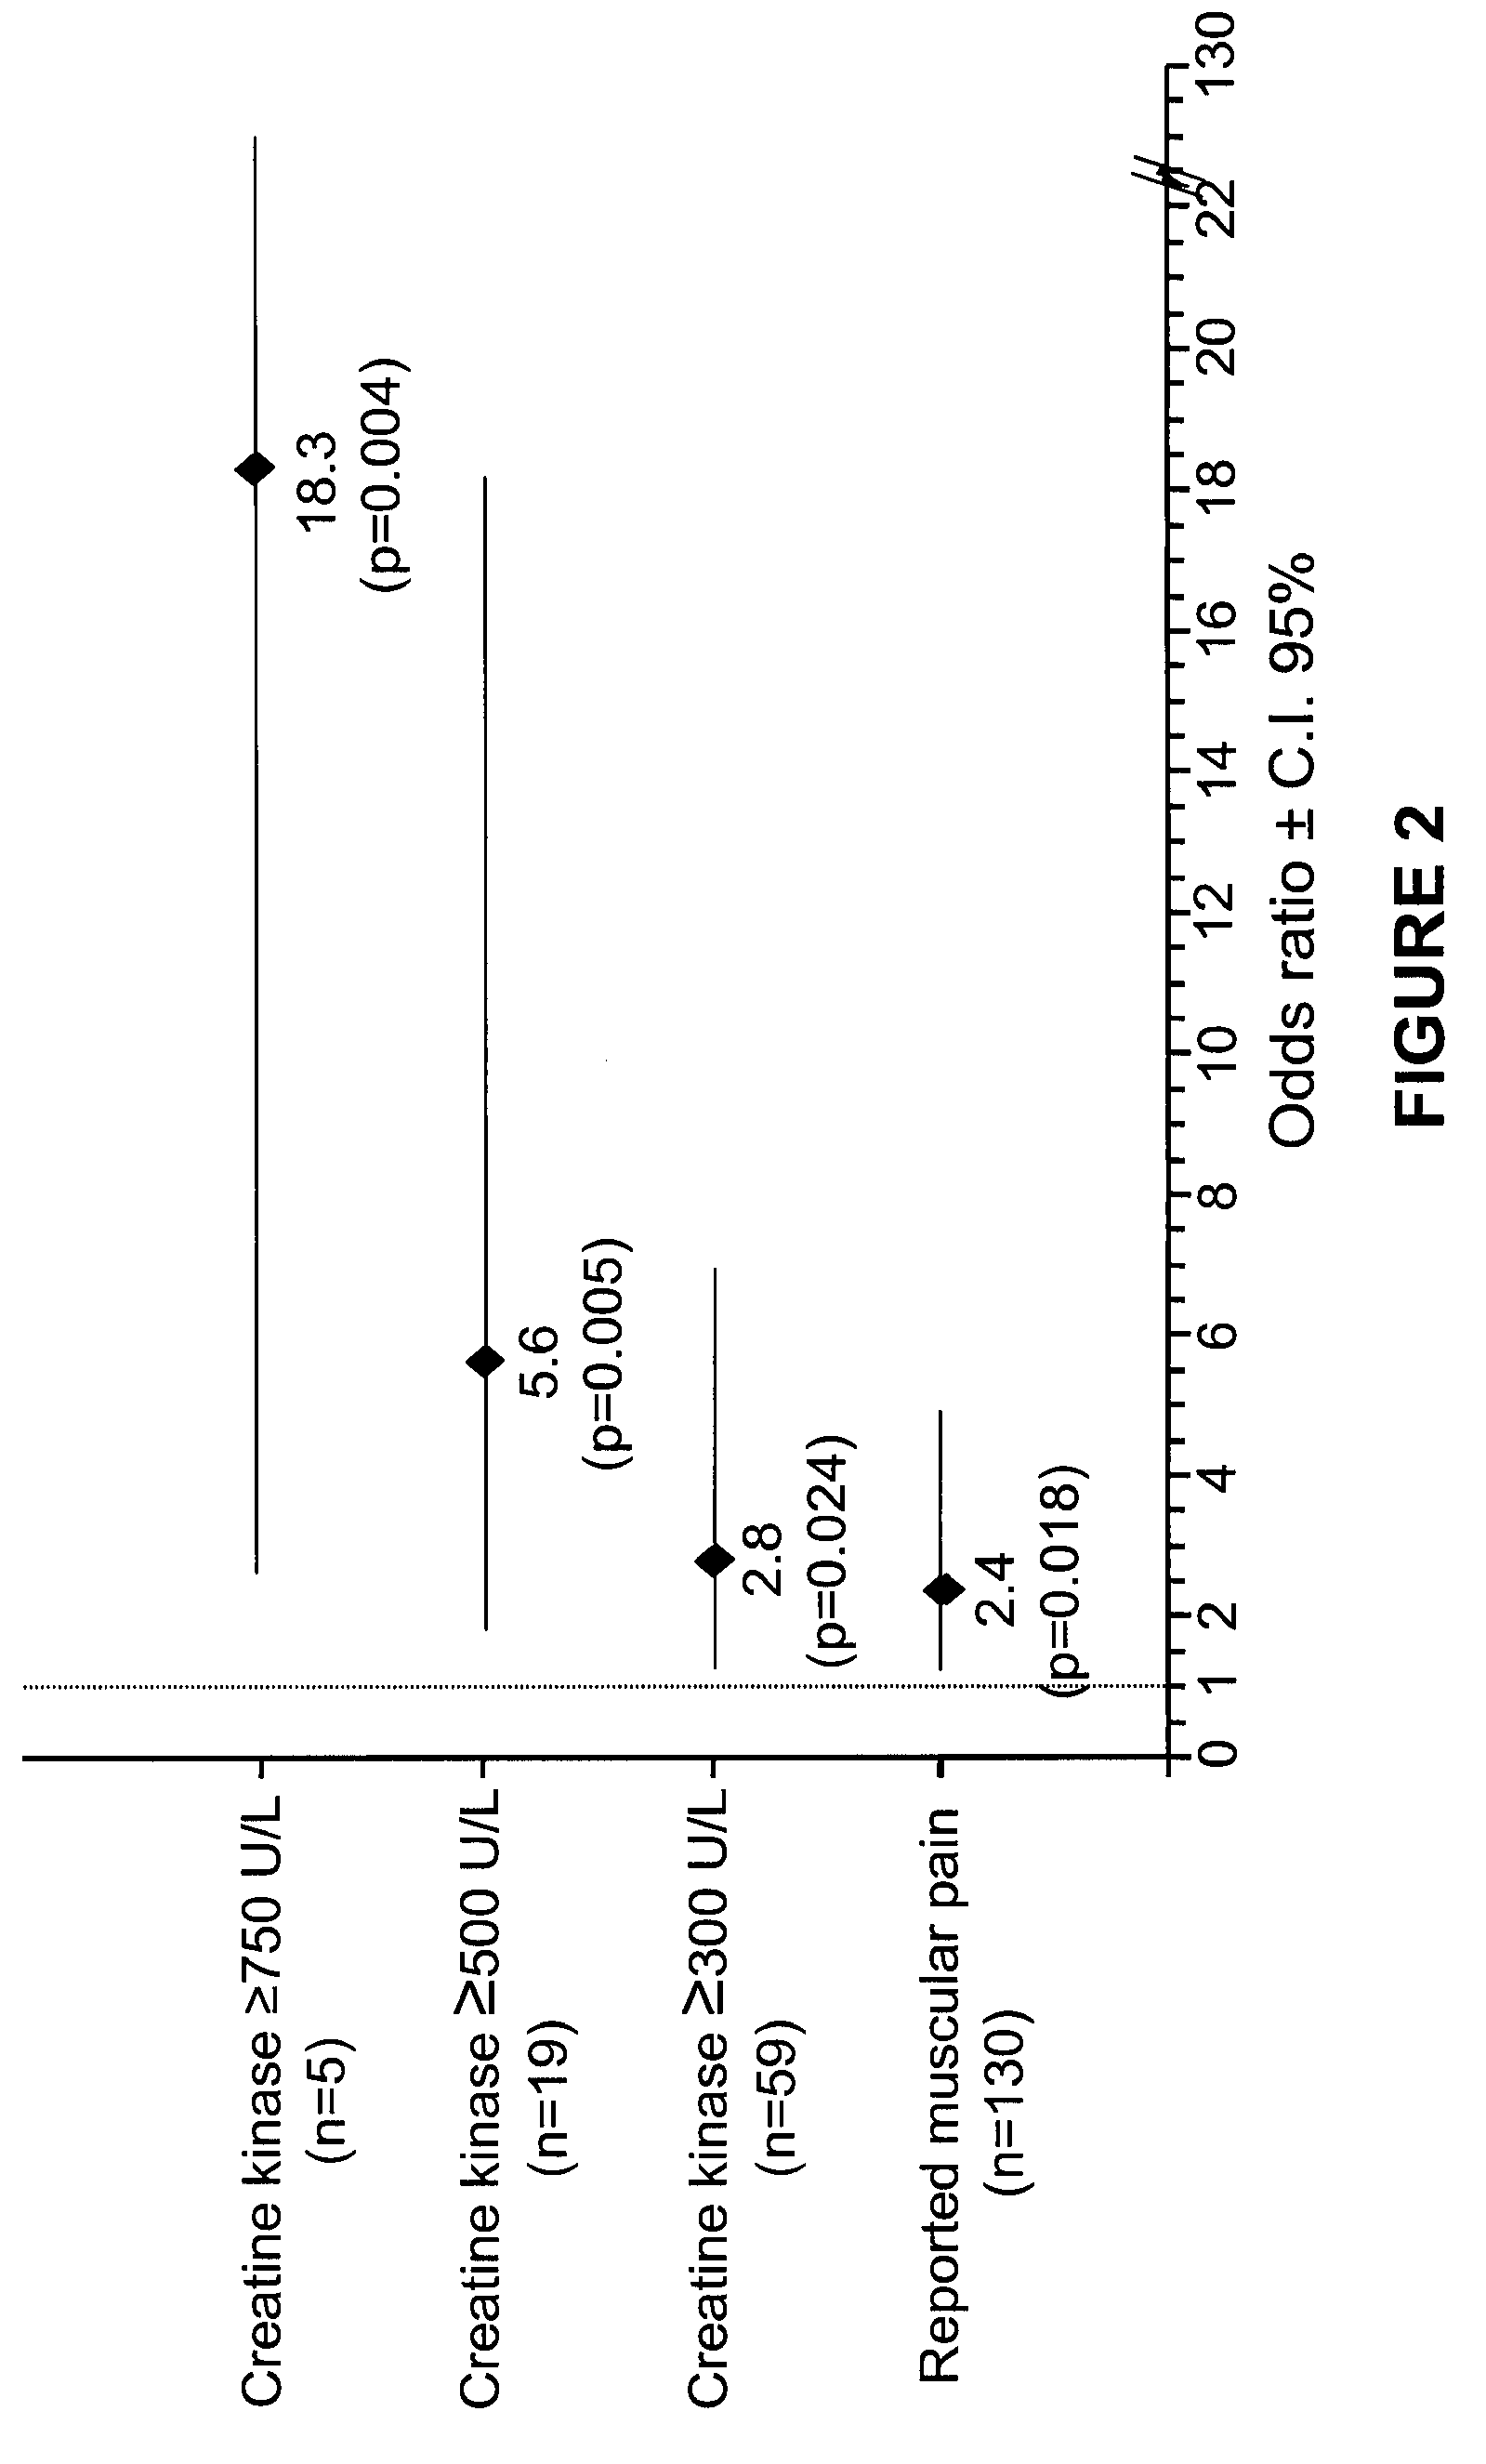 Methods for predicting and detecting intolerance to an hypolipidemic agent